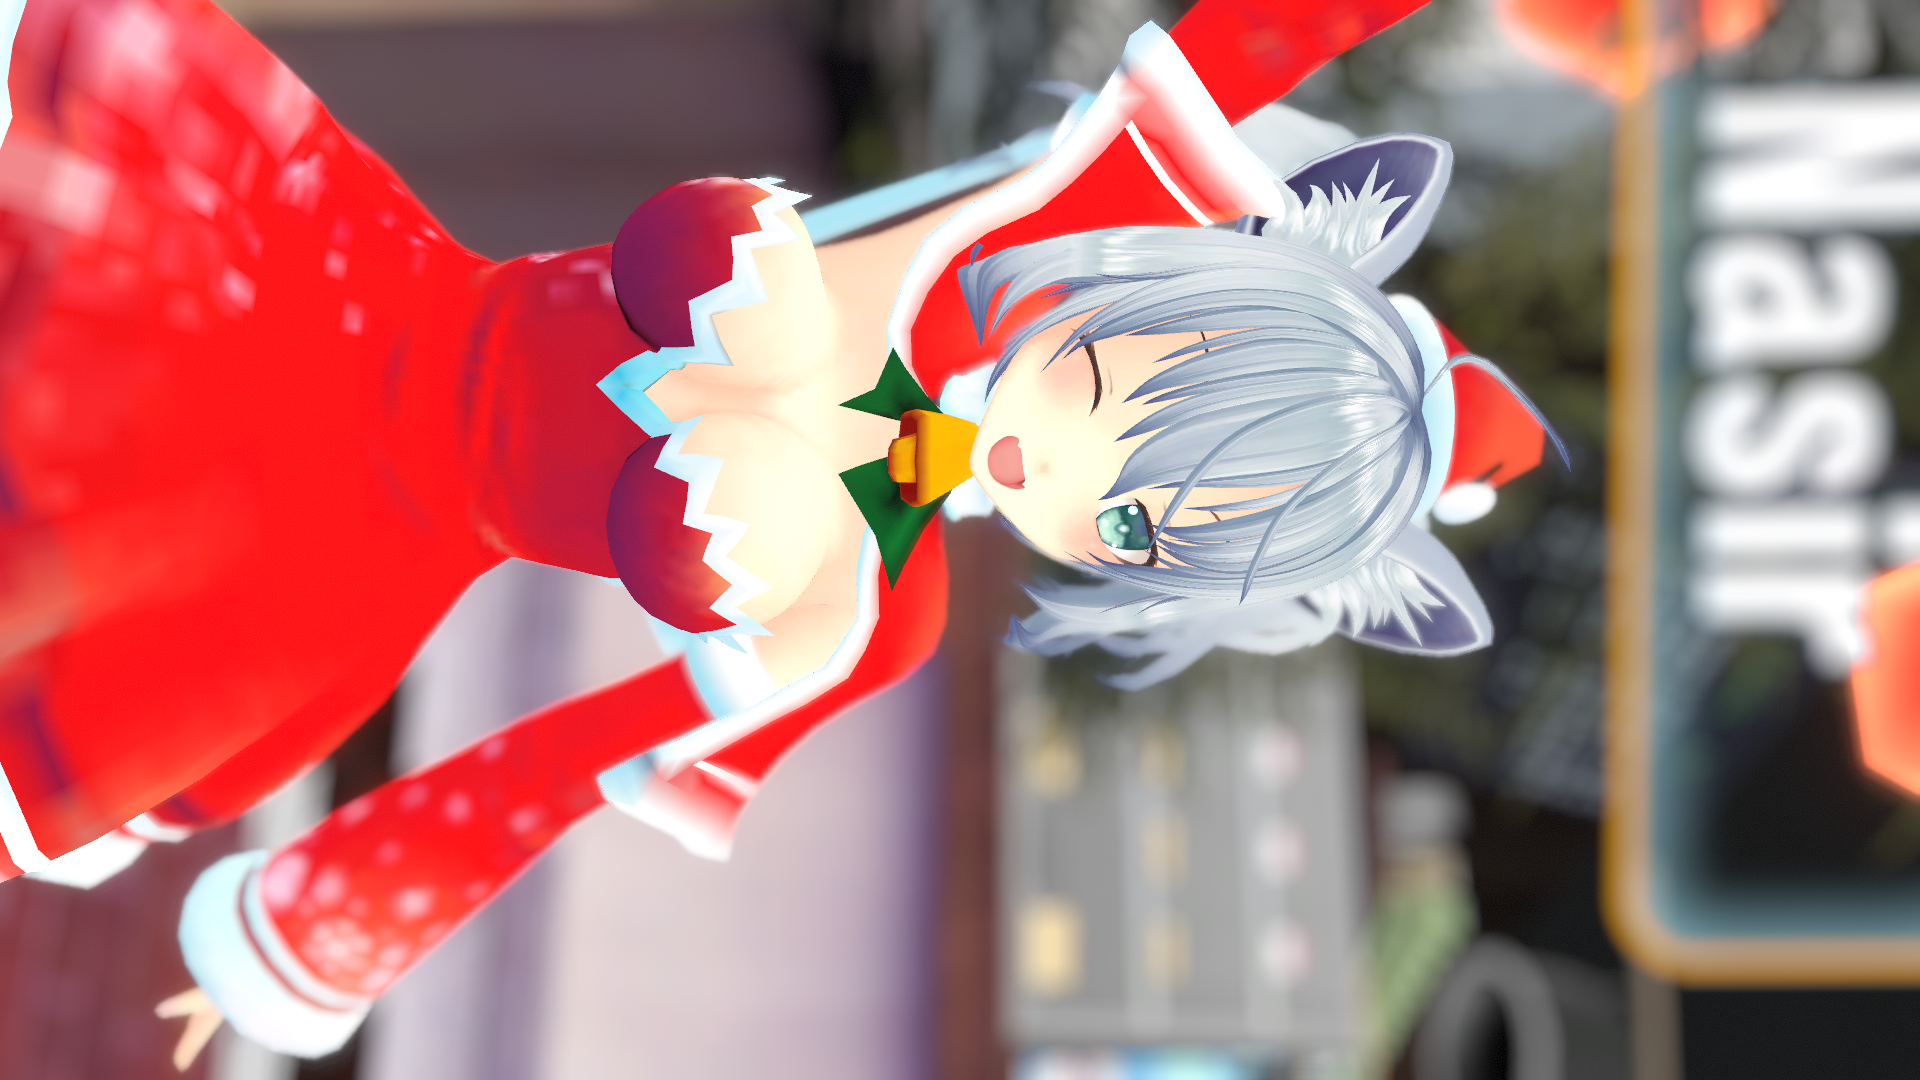 VRChat_1920x1080_2021-12-05_06-01-24.741.png